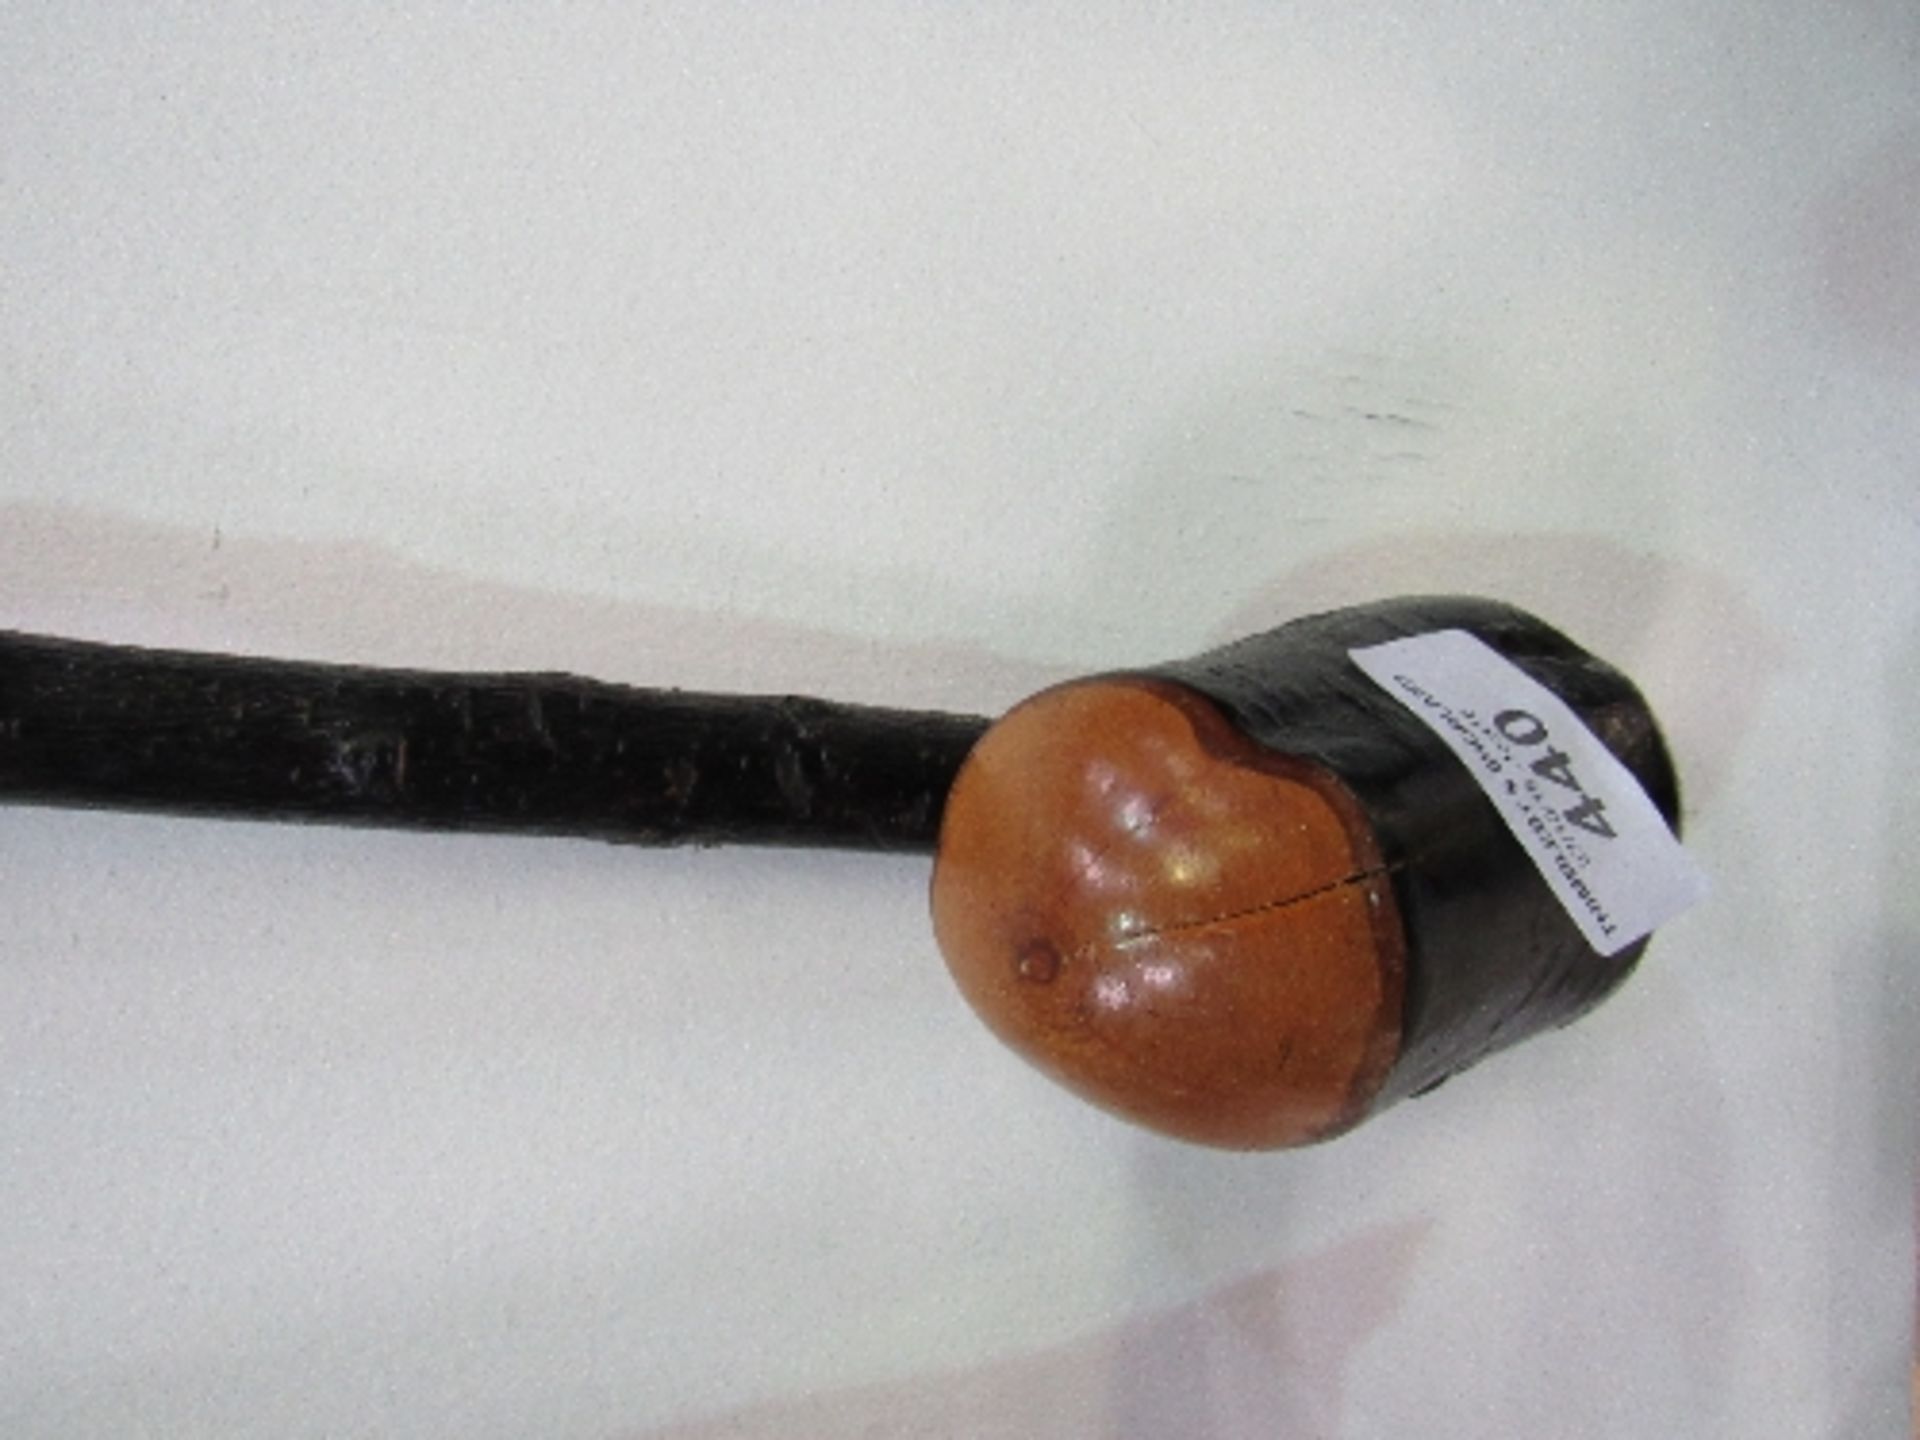 A shillelagh. Price guide £10-15.